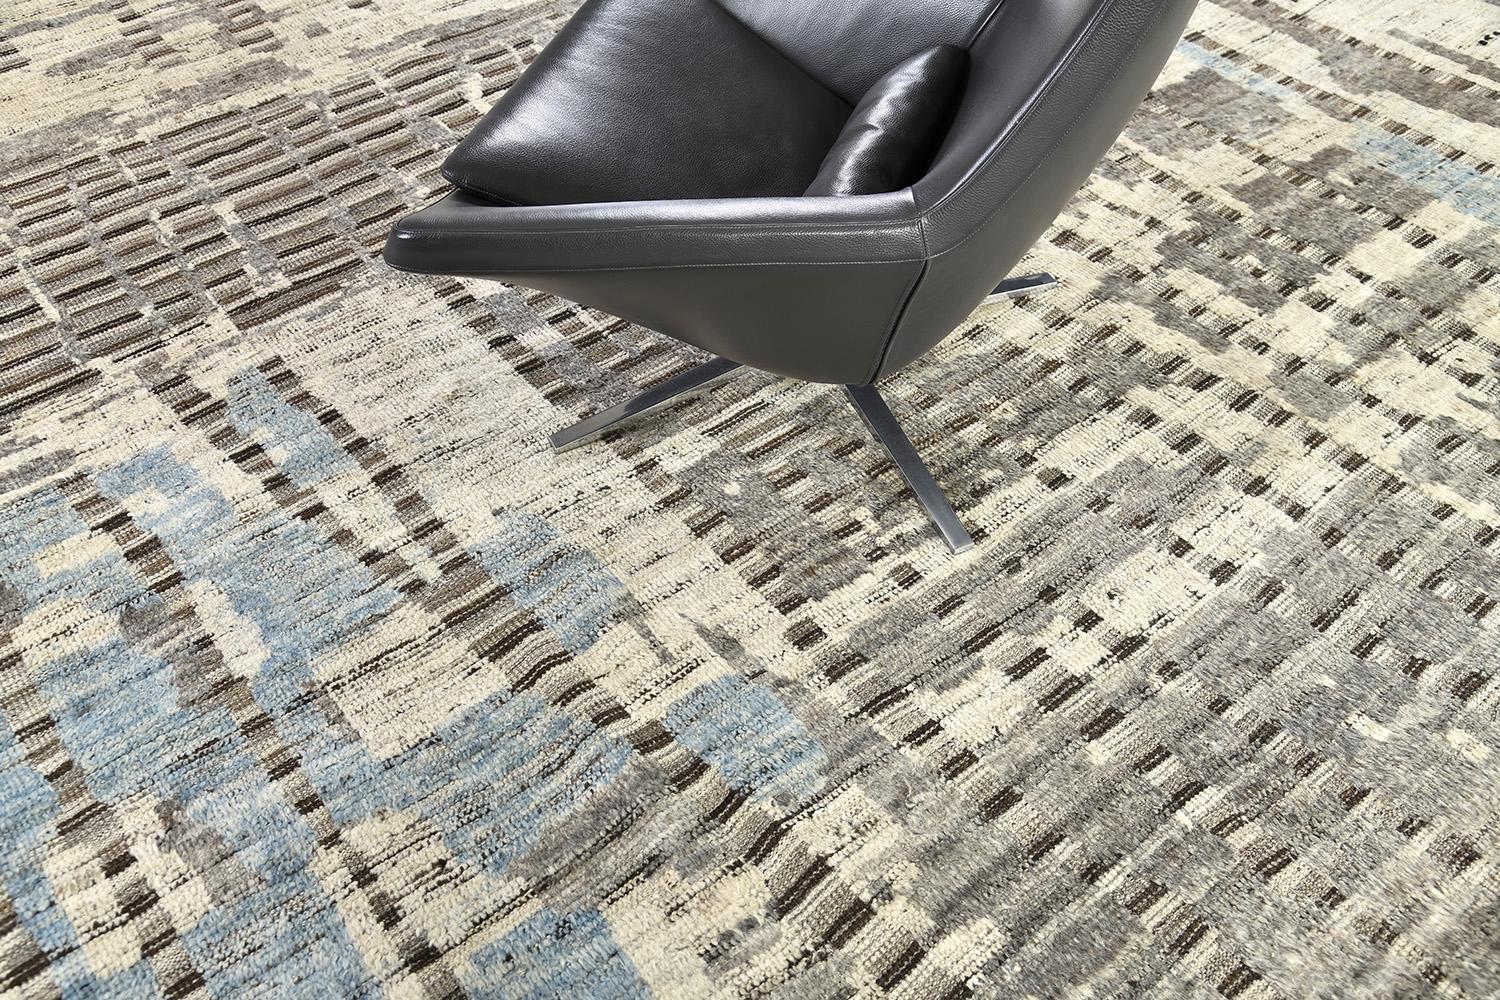 Tamarix is made of luxurious wool and is made of timeless design elements. Its weaving of earthy colors and modern design elements are what makes the Atlas Collection so unique and sought after. Mehraban's Atlas collection is noted for its saturated